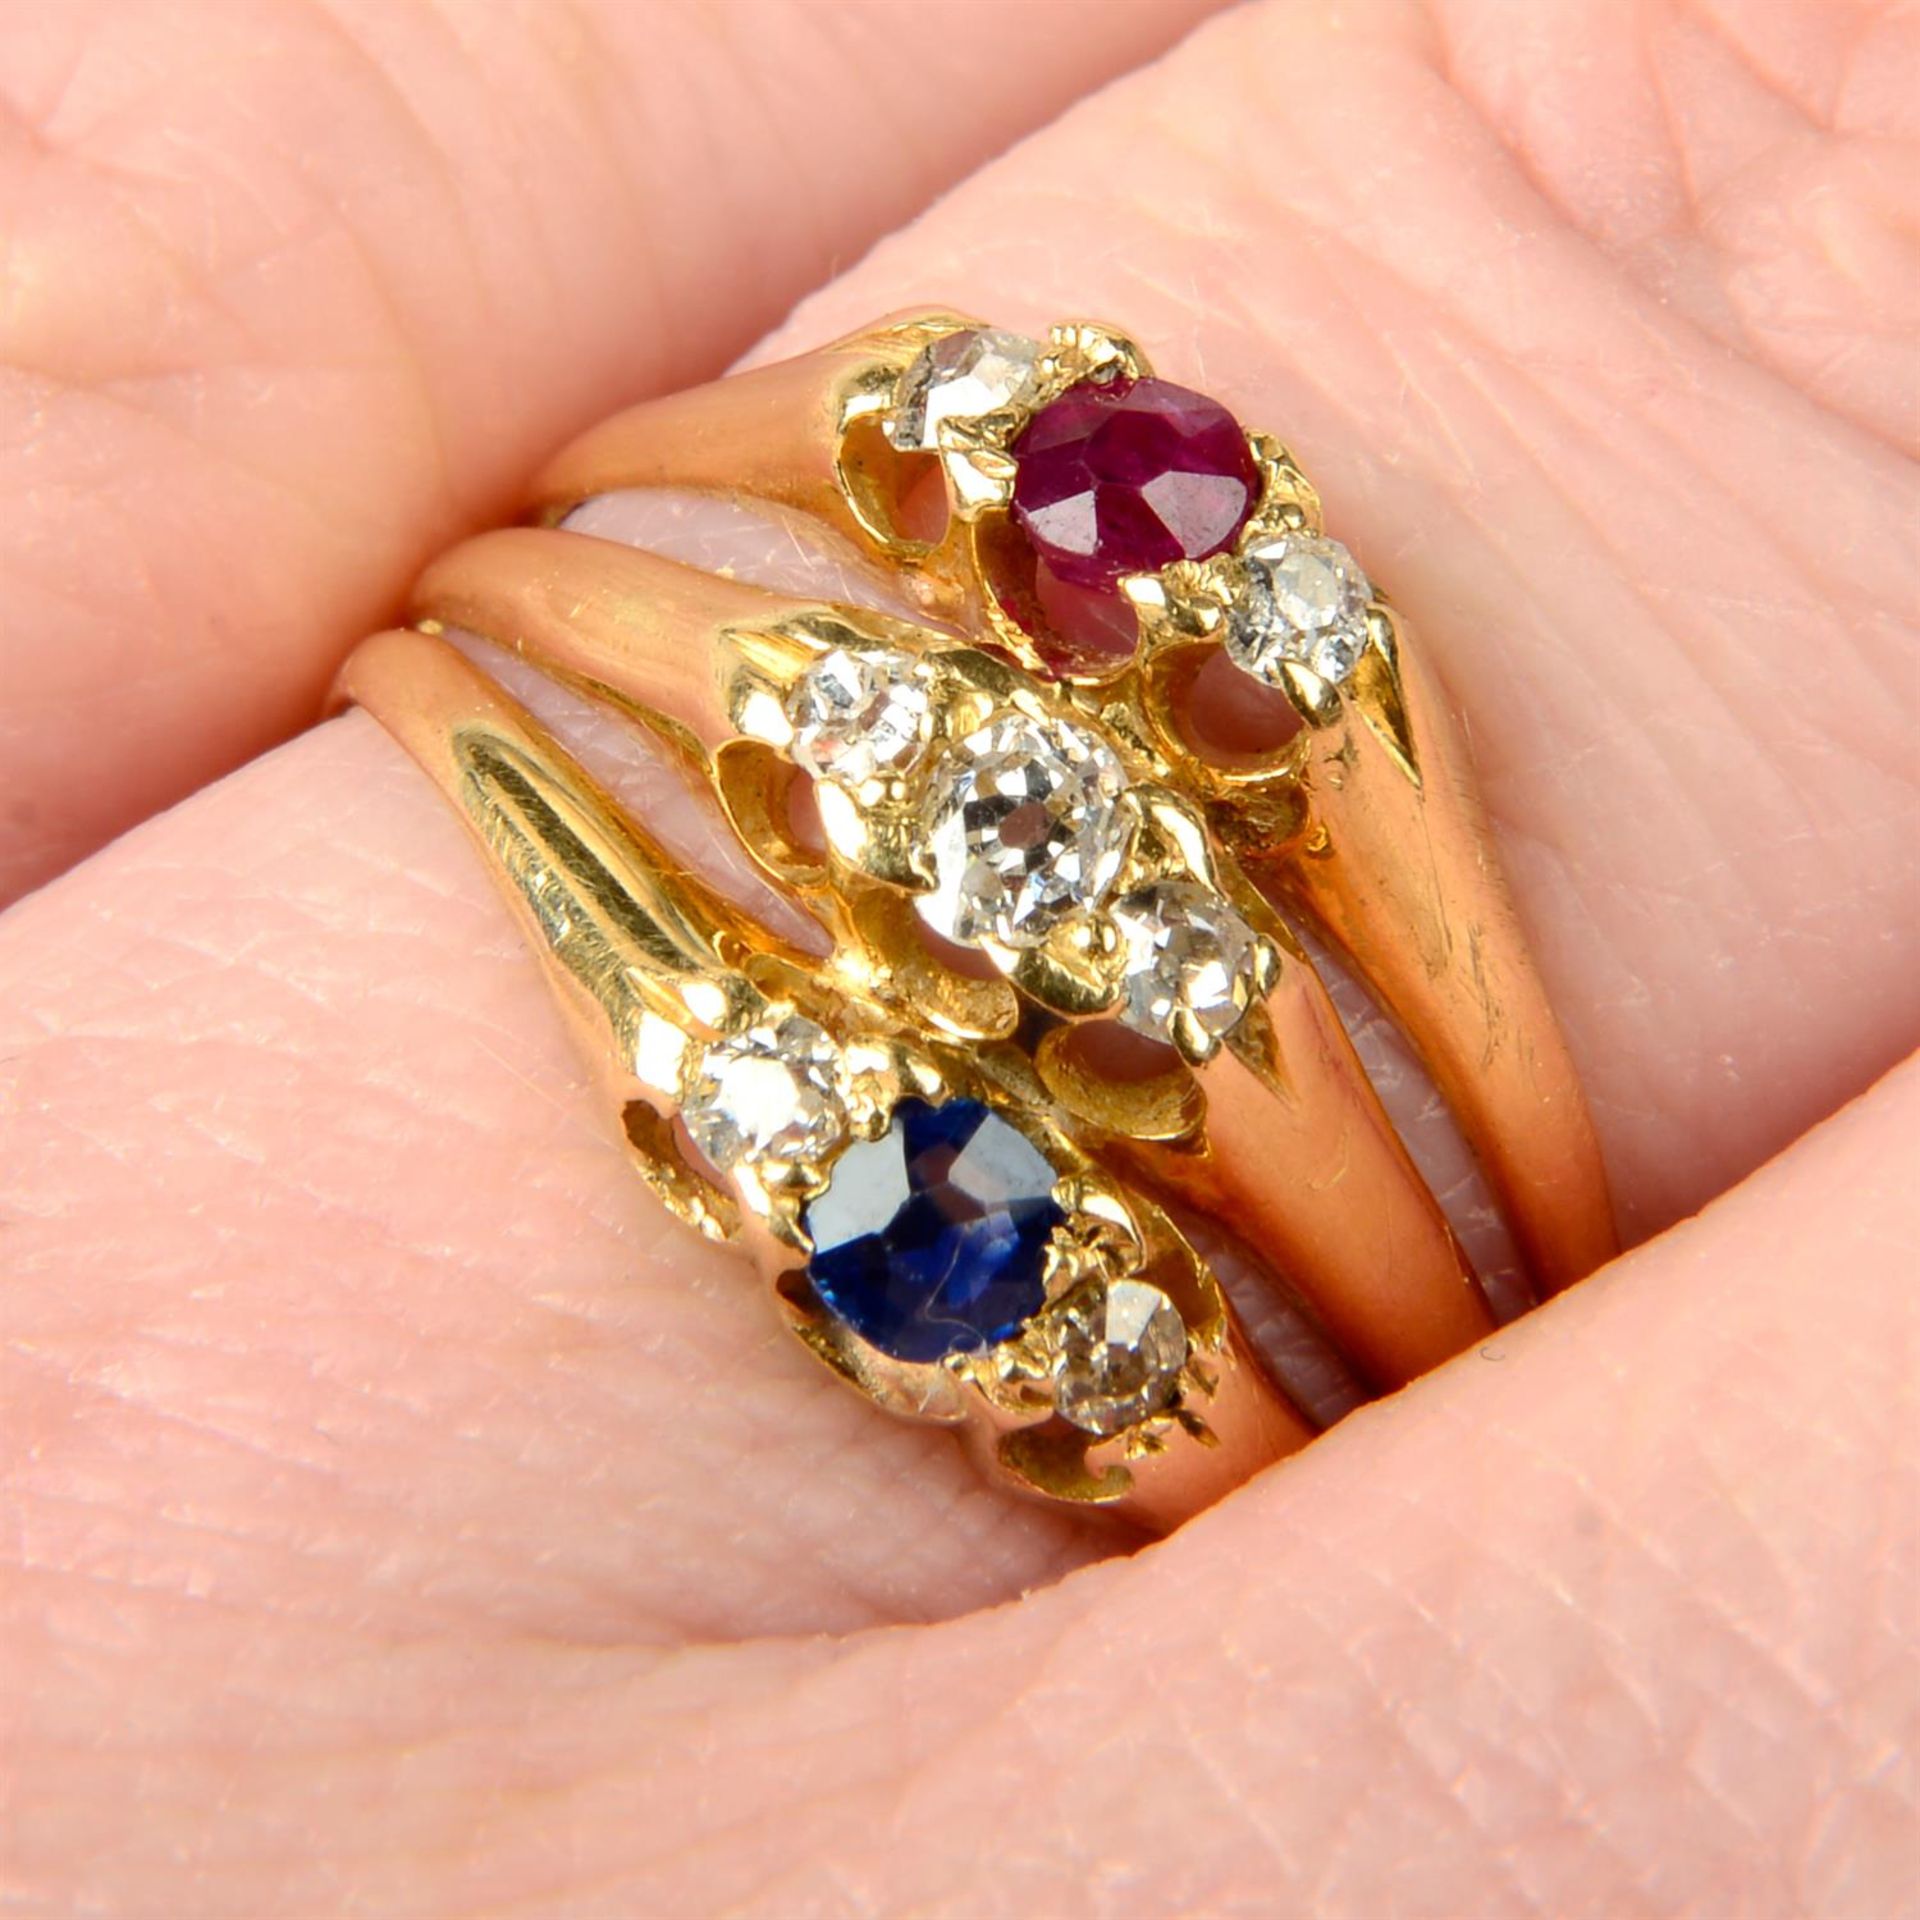 An early 20th century 18ct gold ruby, diamond and sapphire patriotic ring.